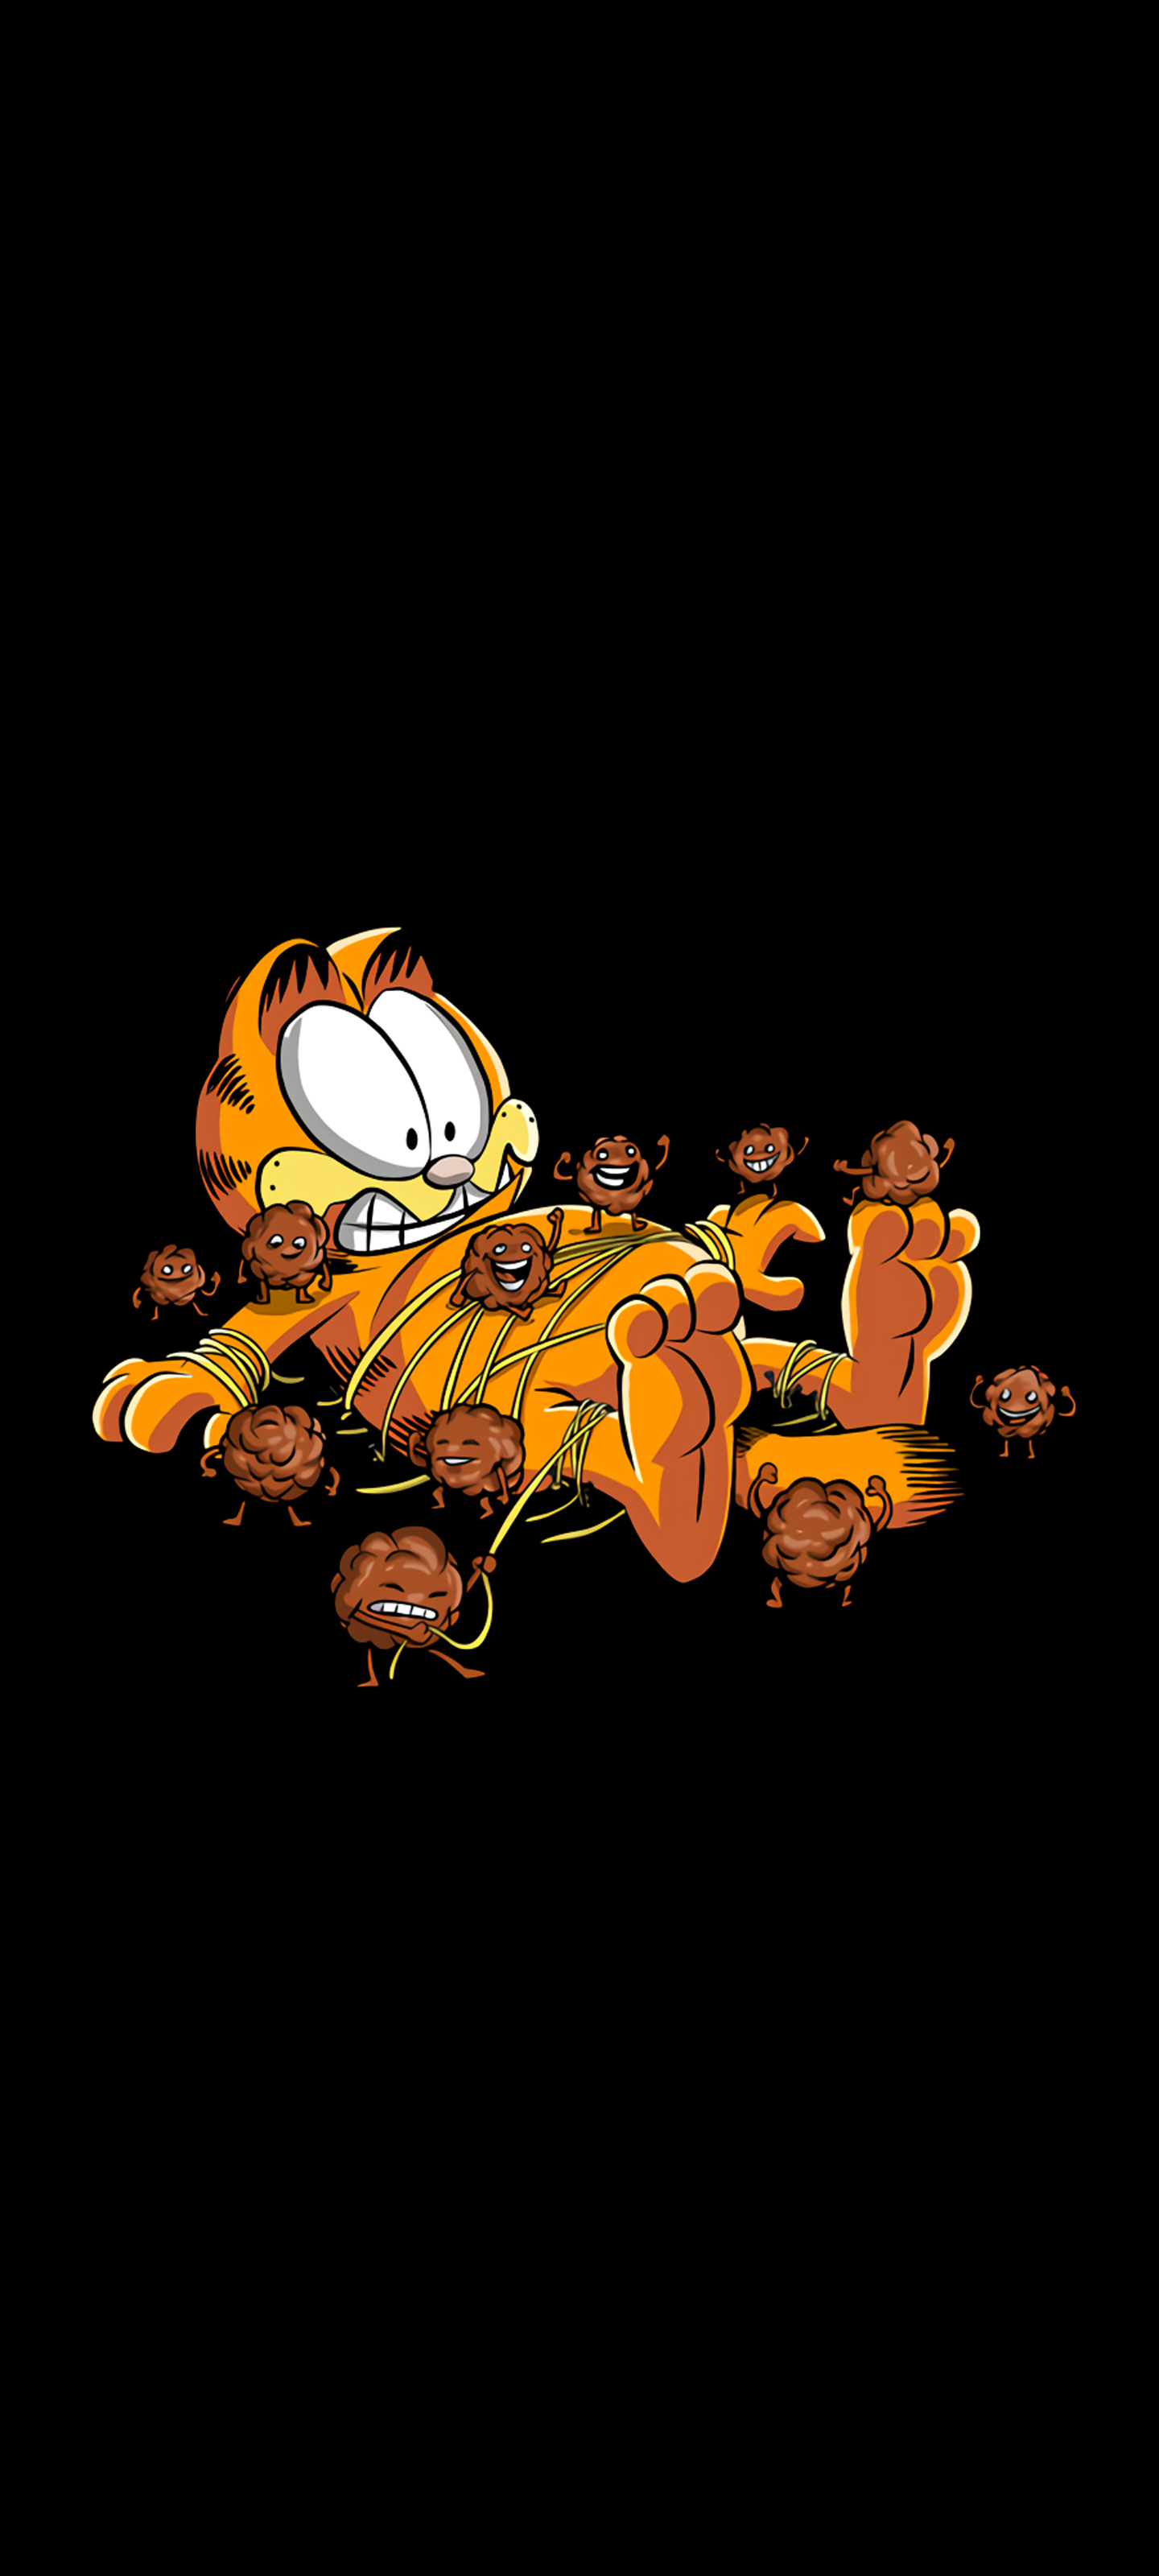 Garfield: An overweight, anthropomorphic orange tabby cat noted for his sheer laziness, sarcasm. 1440x3200 HD Wallpaper.